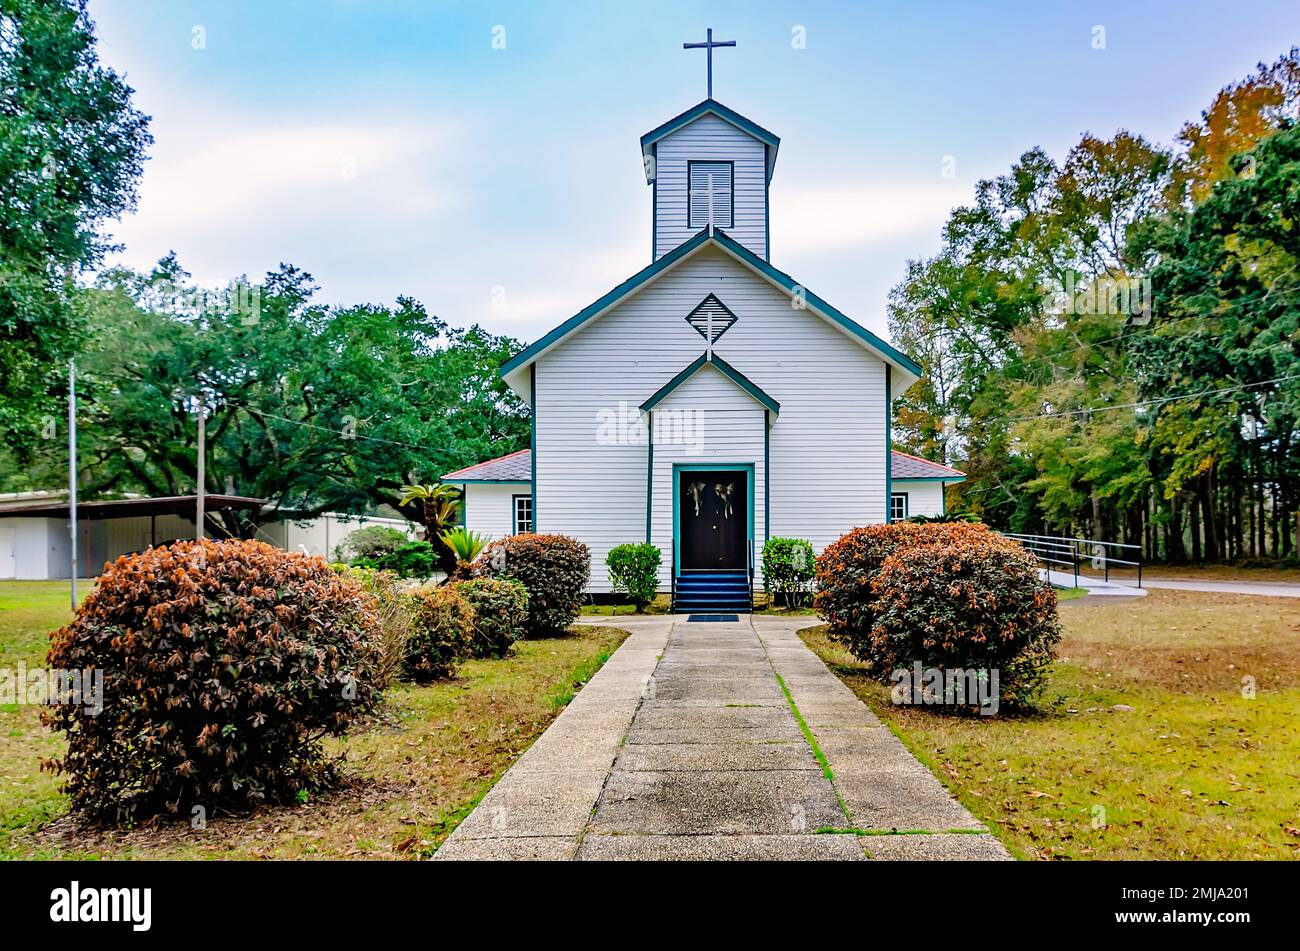 Saint Rose of Lima Catholic Church is pictured on Mon Louis Island, Jan. 1, 2023, in Coden, Alabama. The church was built in 1900. Stock Photo